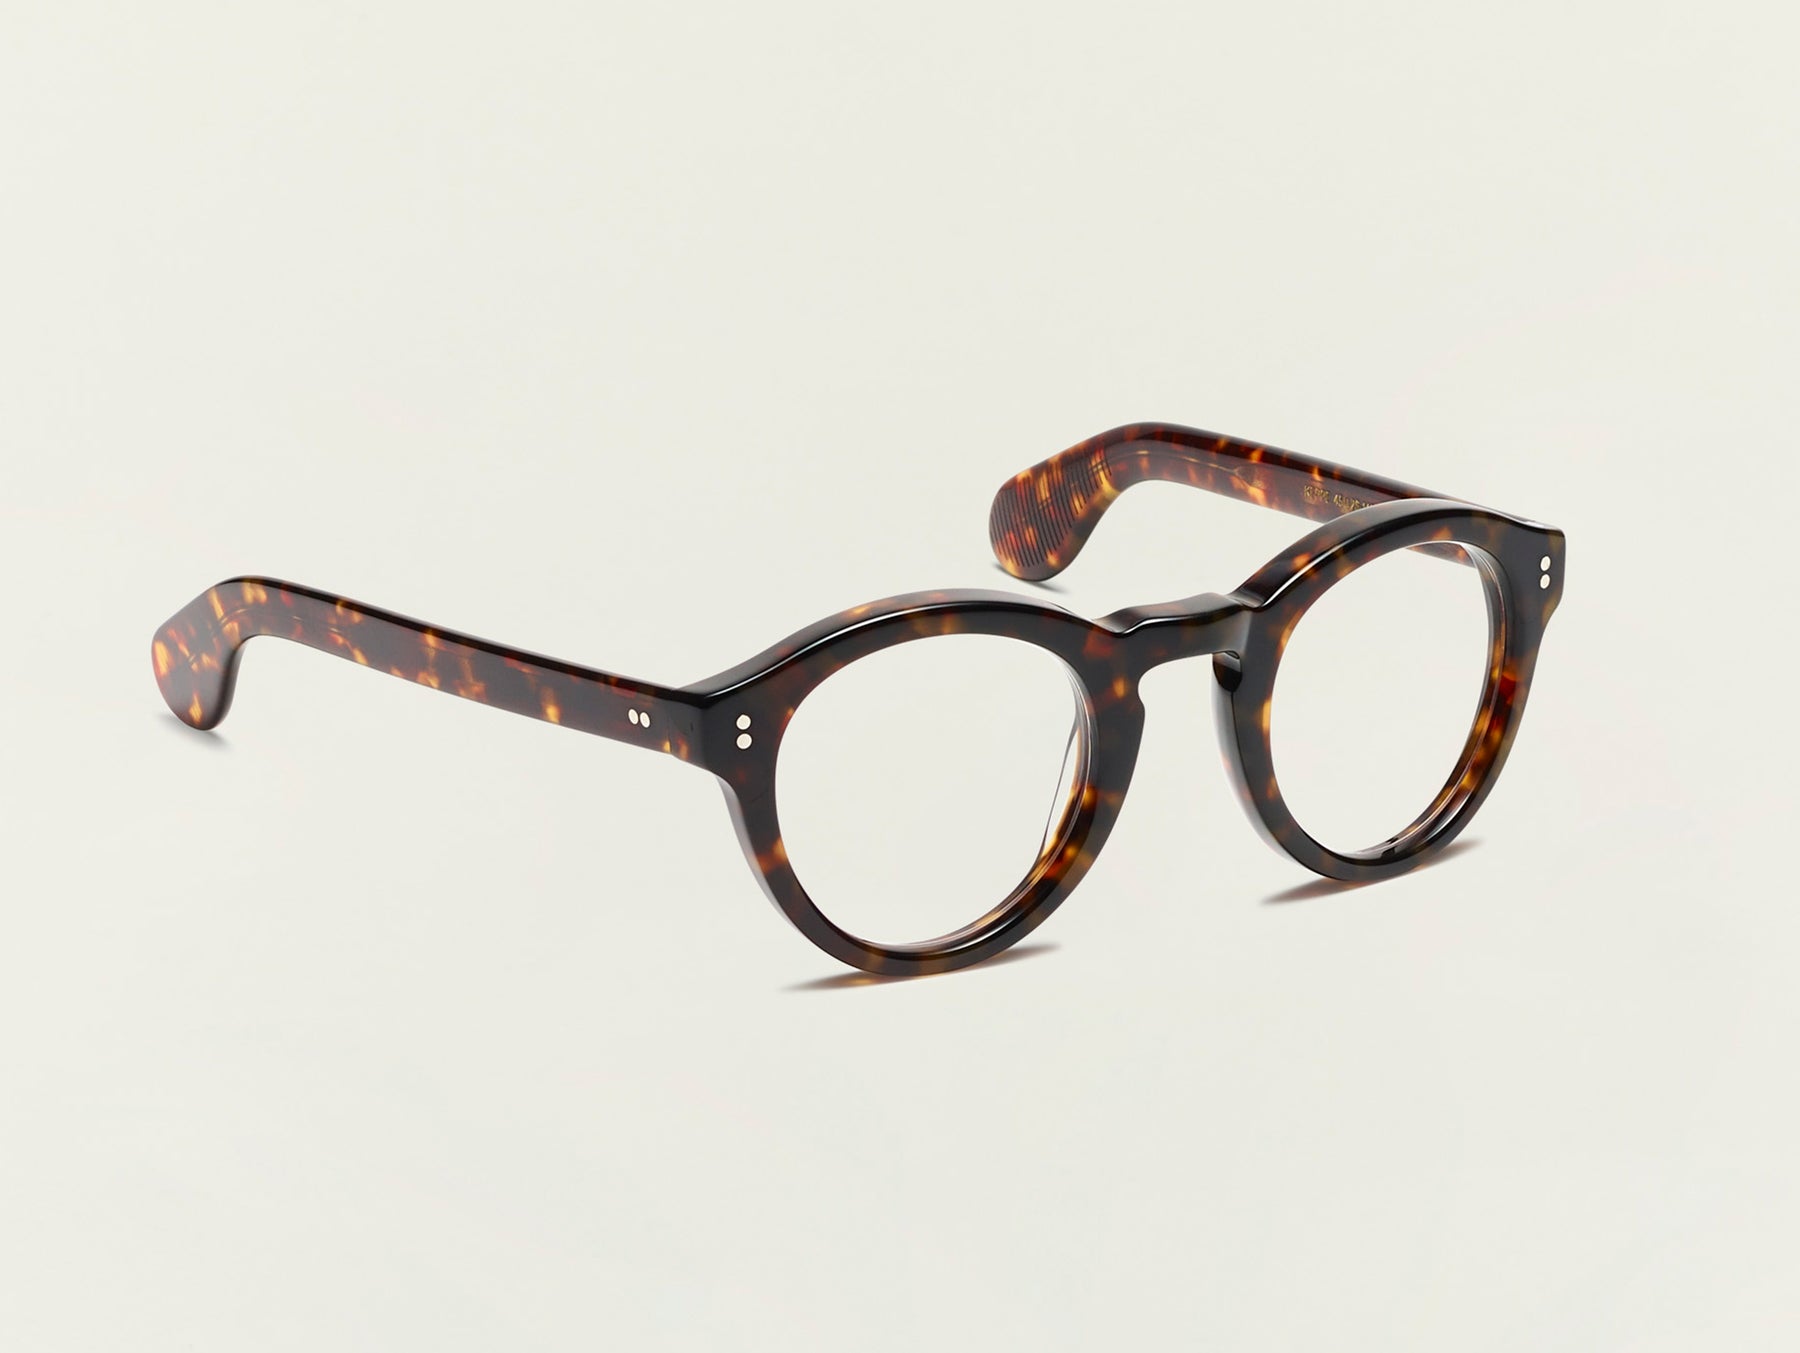 The KEPPE in Tortoise